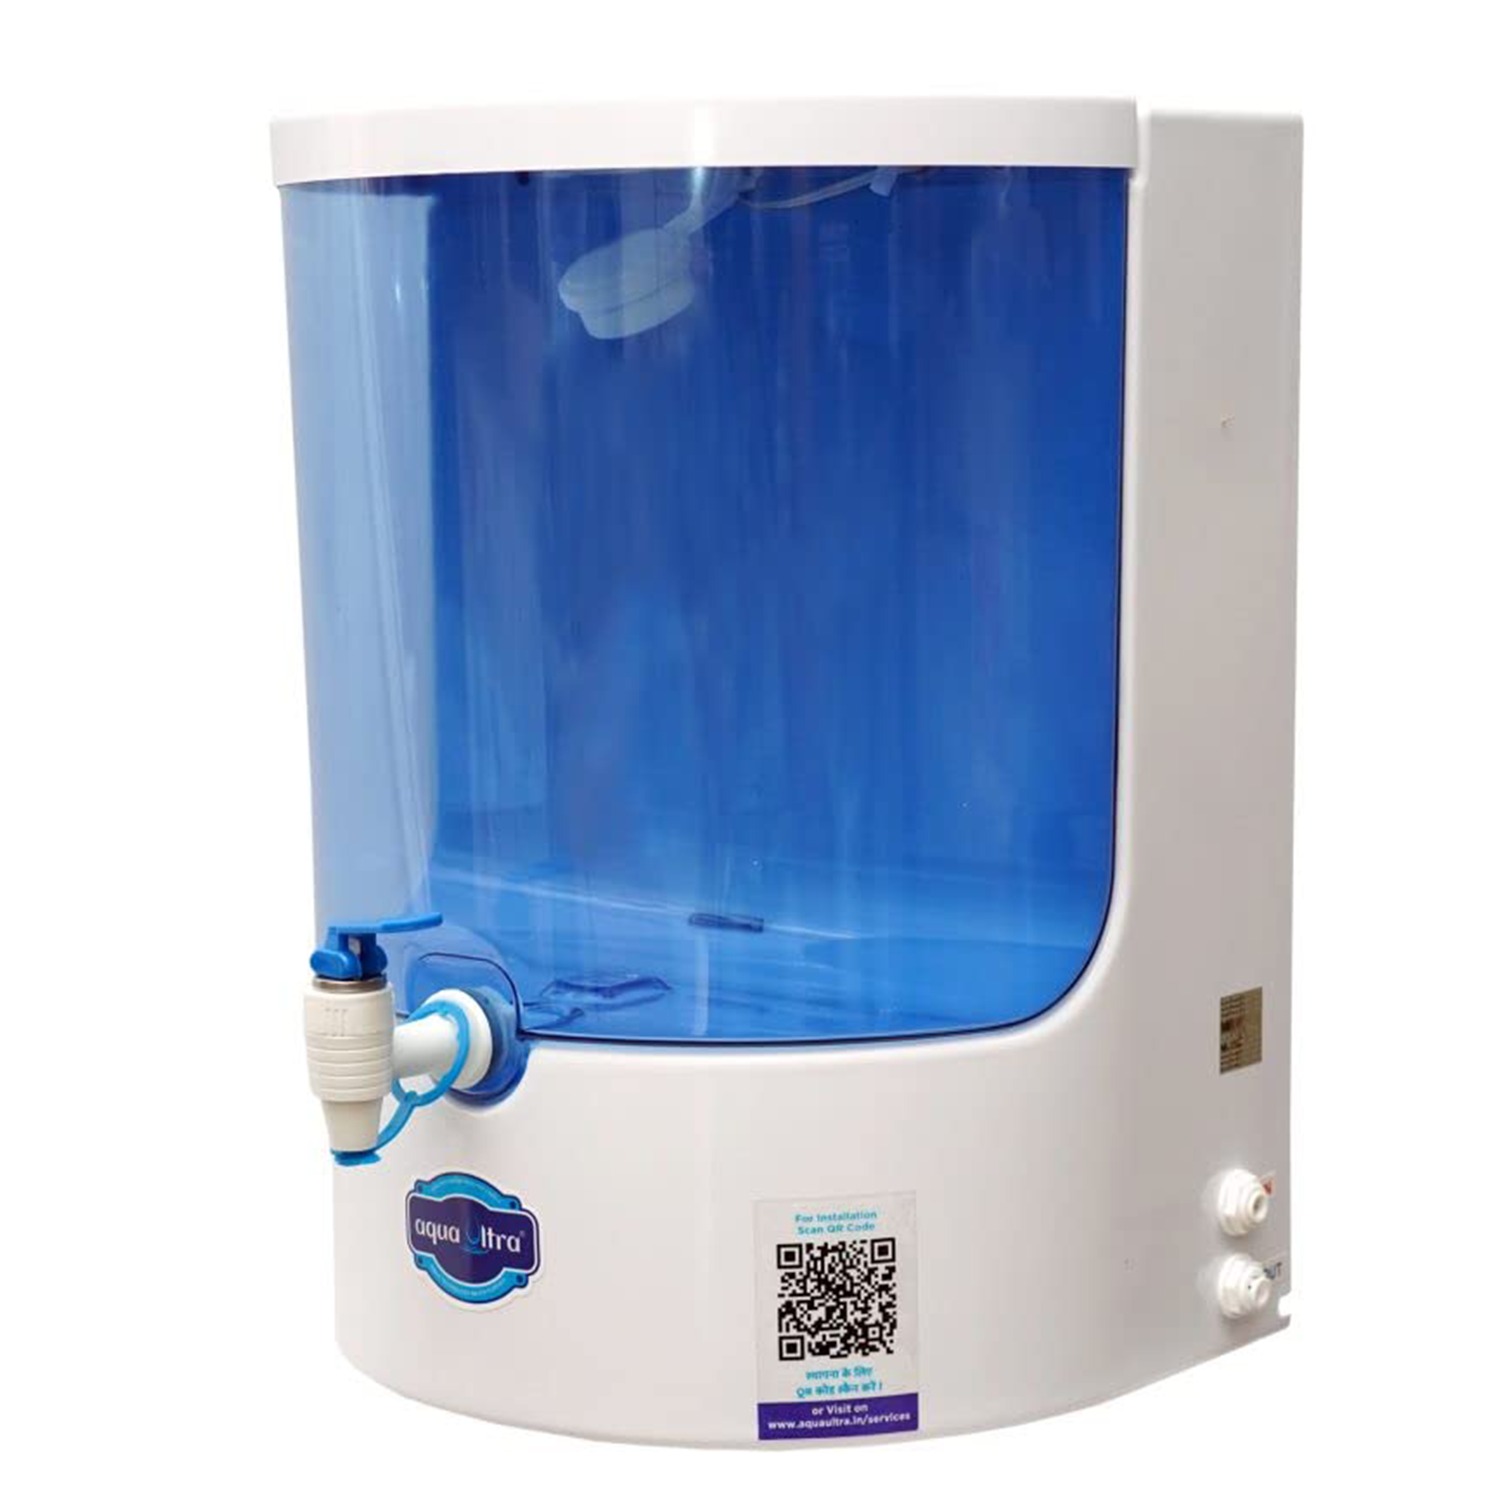 Aquafresh Dolphin 5 Stage Purification 9 Liter RO+UV+Copper+Activated Aarbon Technology